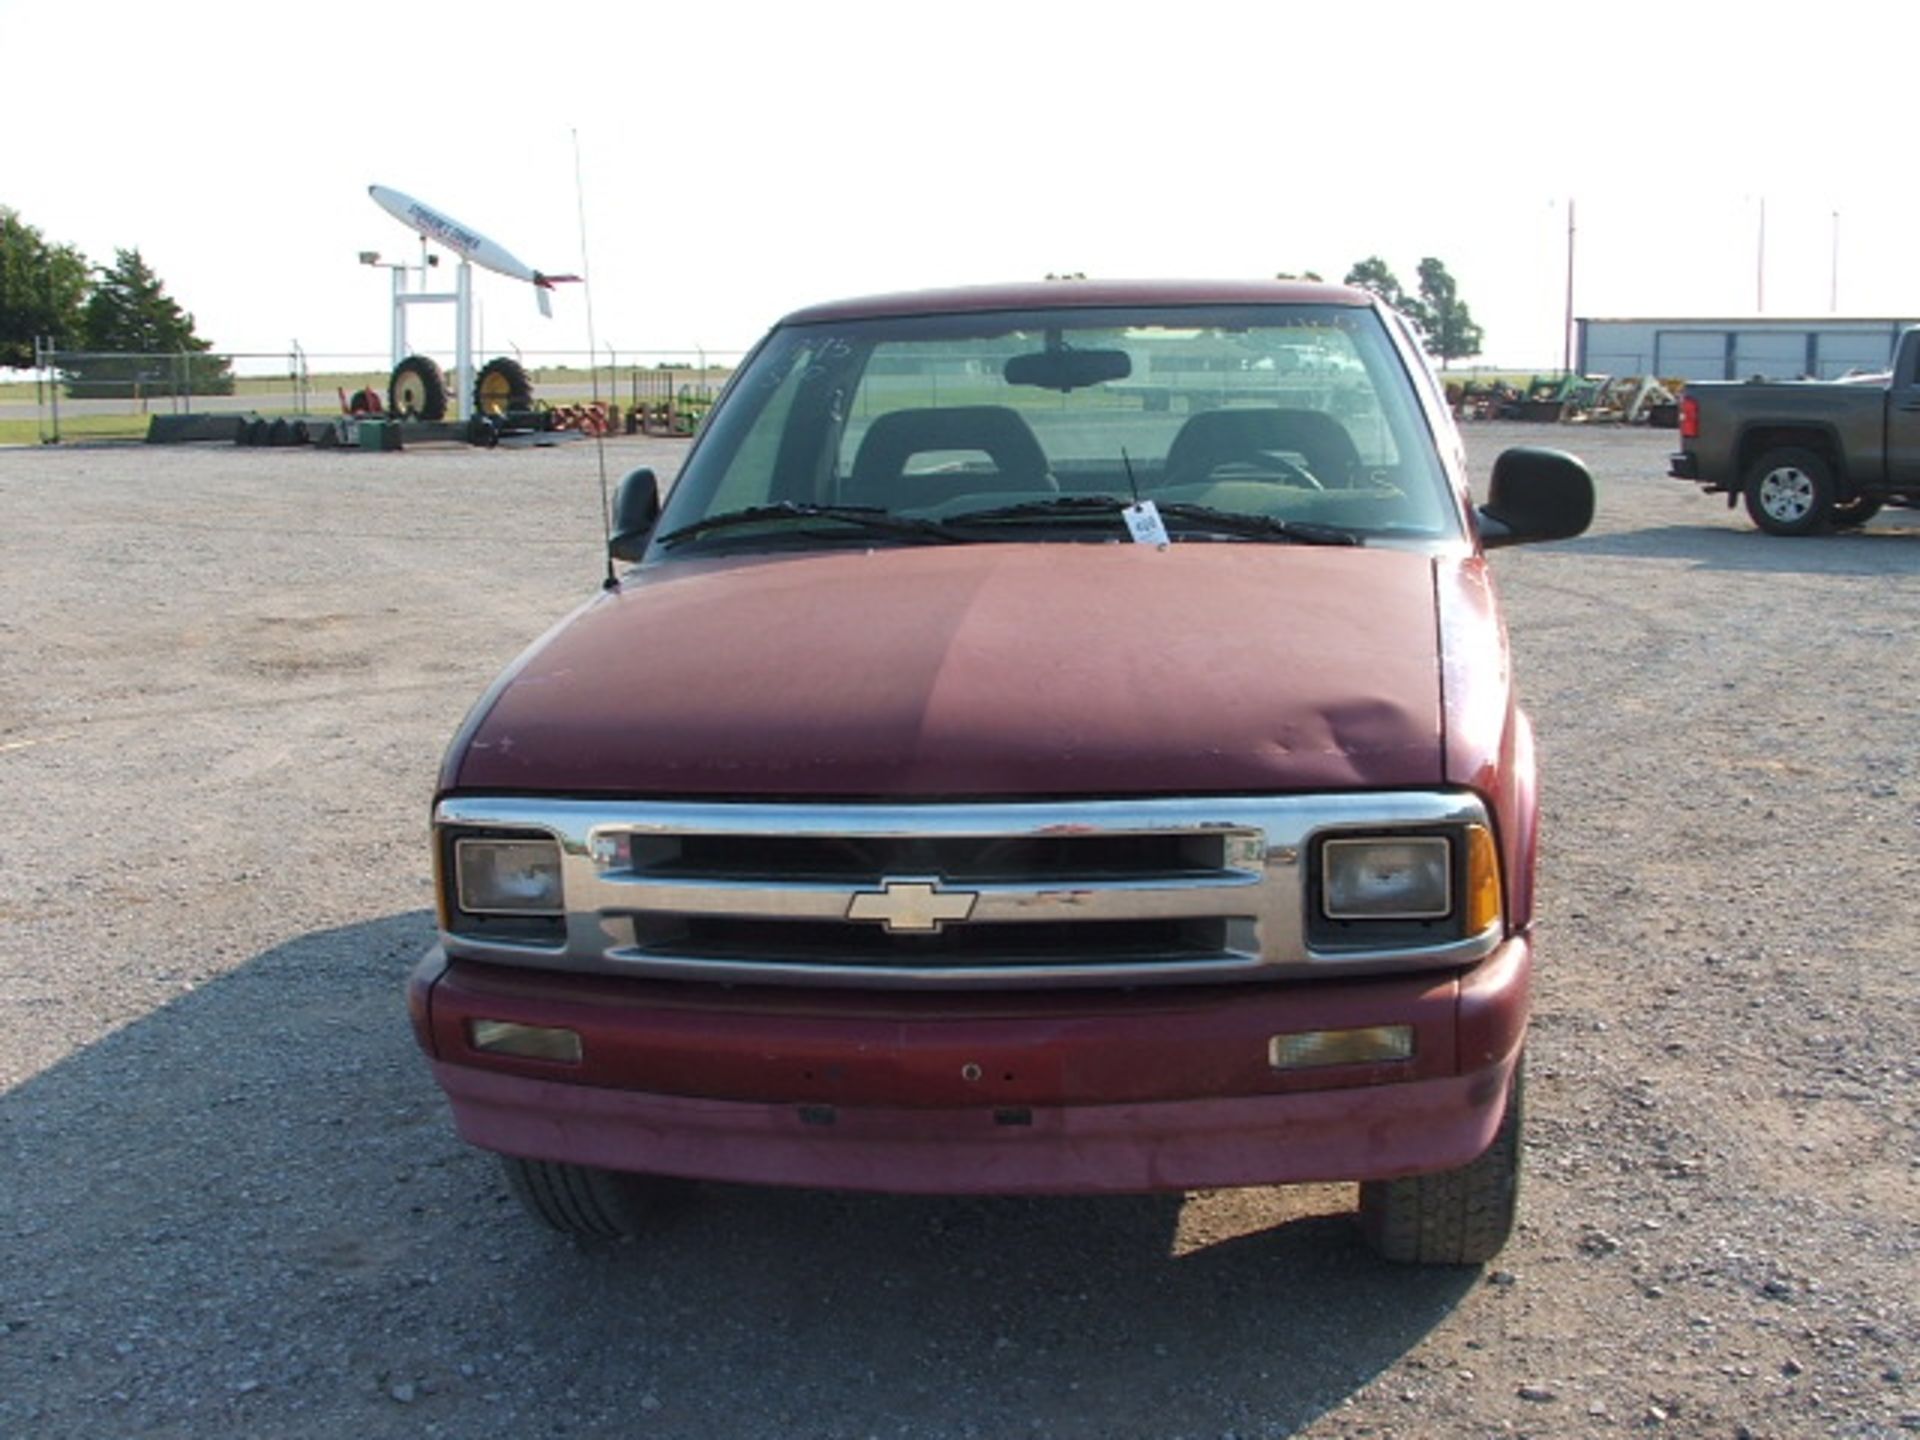 Lot 836 1995 Chevy S10 4Cyl Automatic - As-Is - Image 3 of 5